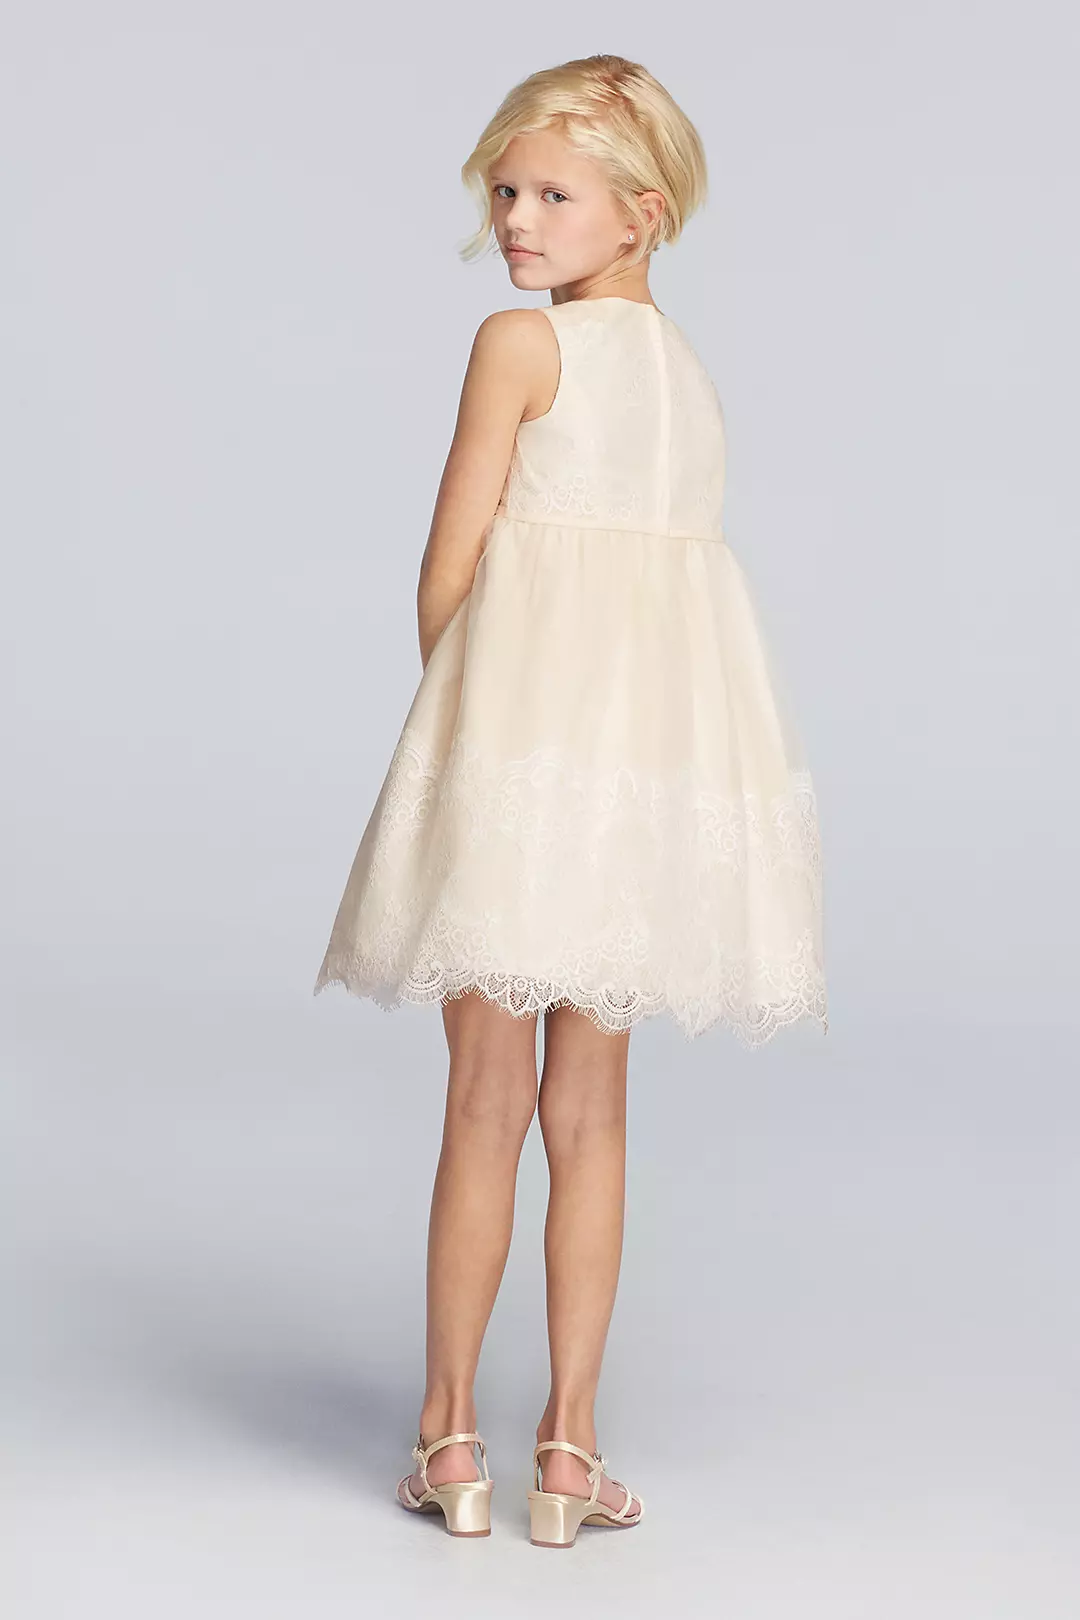 Tank Tulle Flower Girl Dress With Lace Applique | David's Bridal